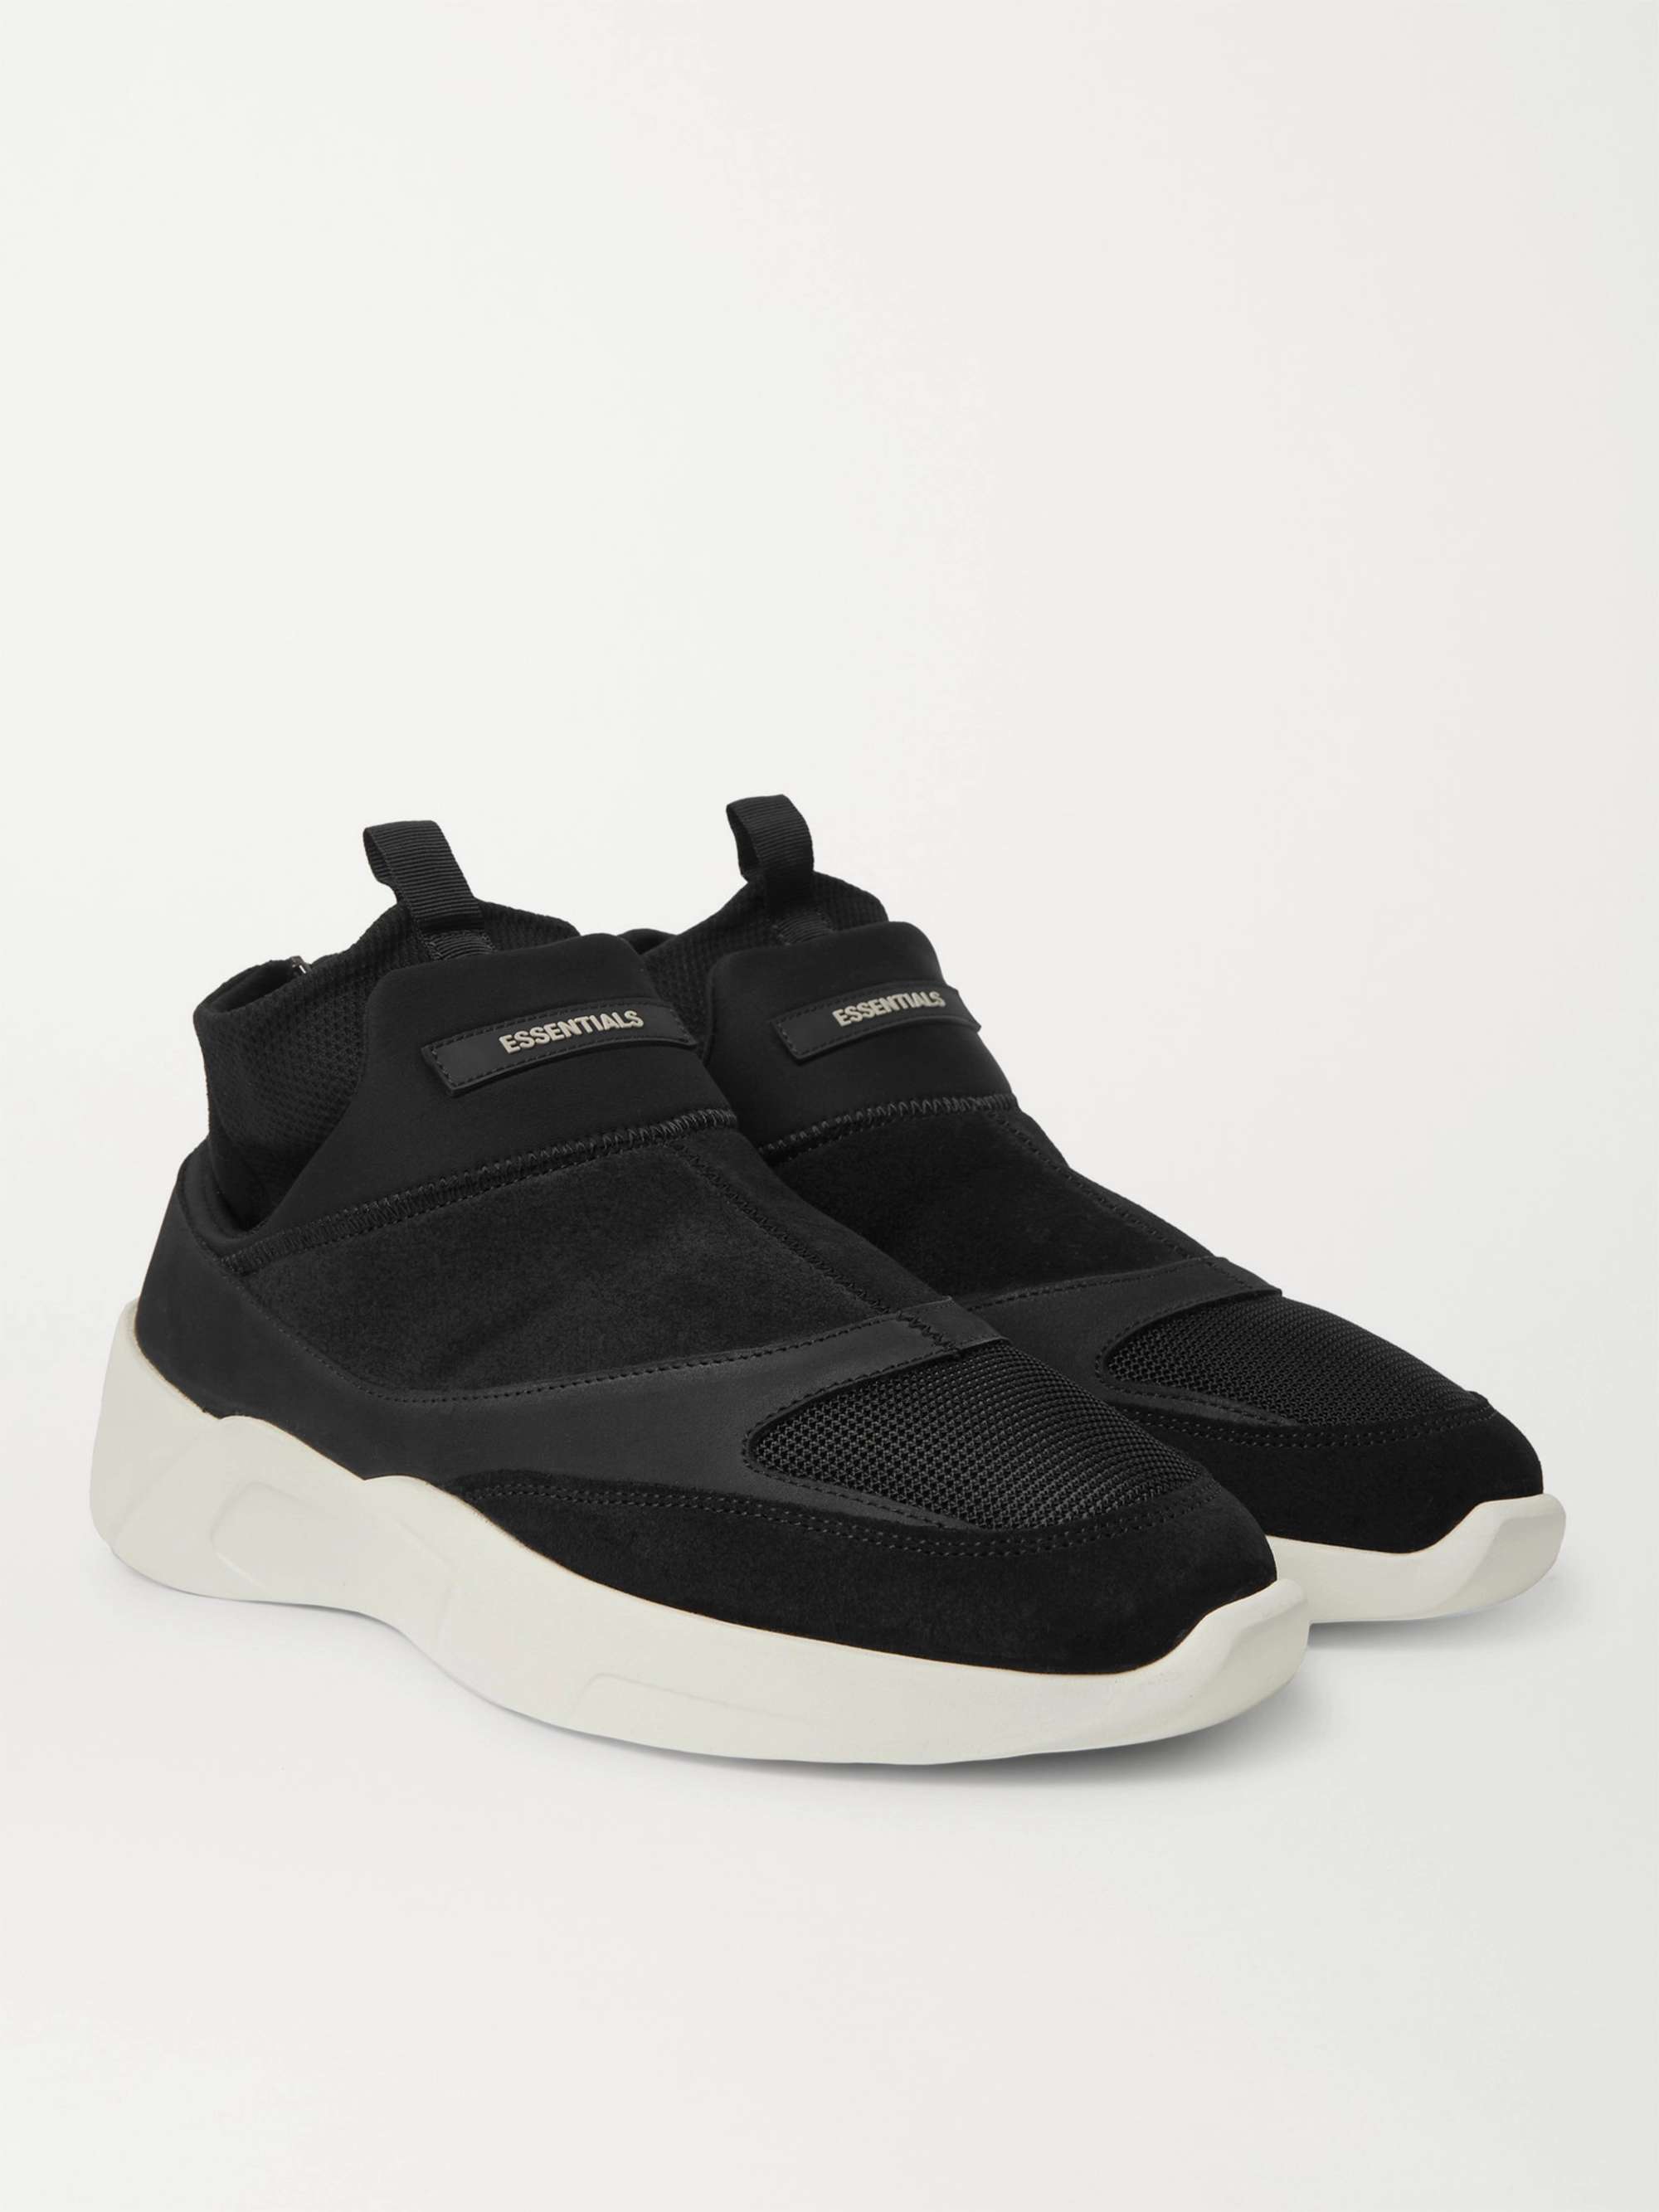 FEAR OF GOD ESSENTIALS Suede, Mesh and Neoprene Sneakers